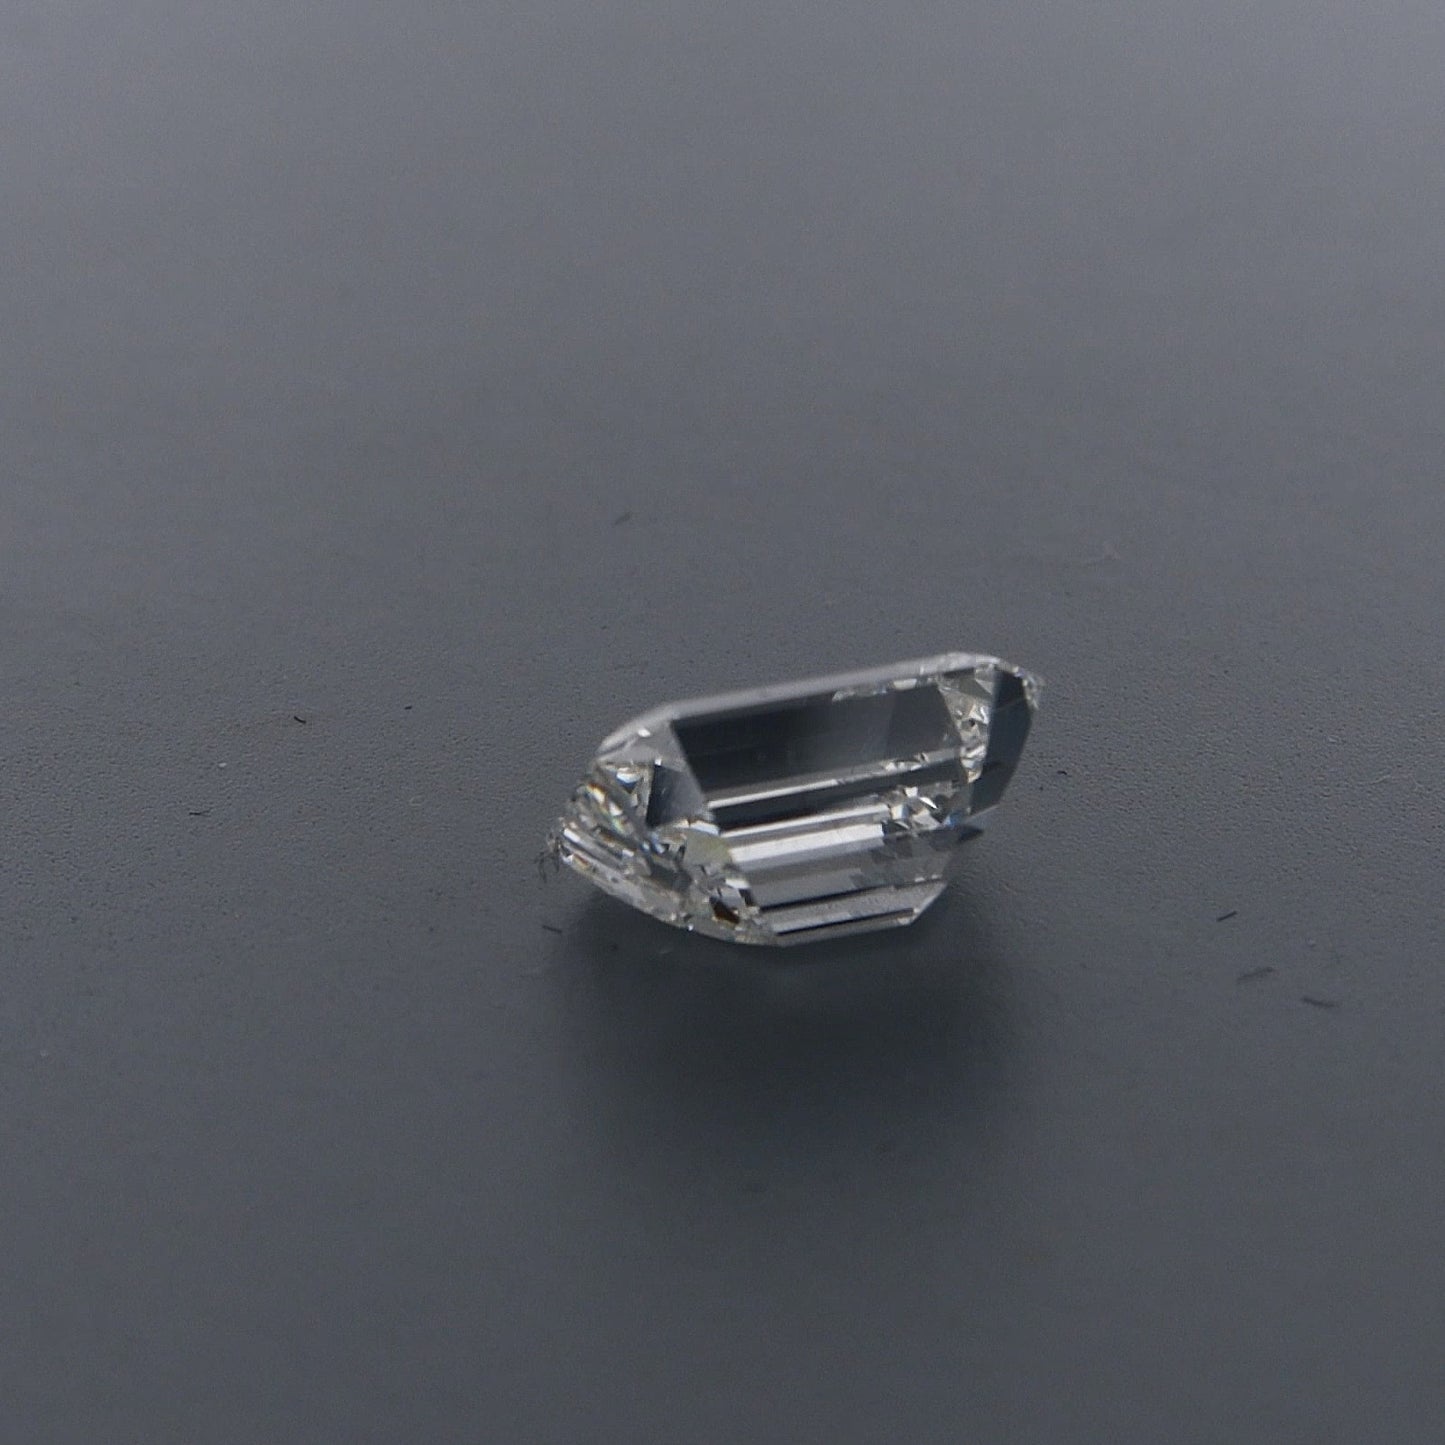 Emerald Cut 2.01ct IVS1 Diamond with GIA Certification